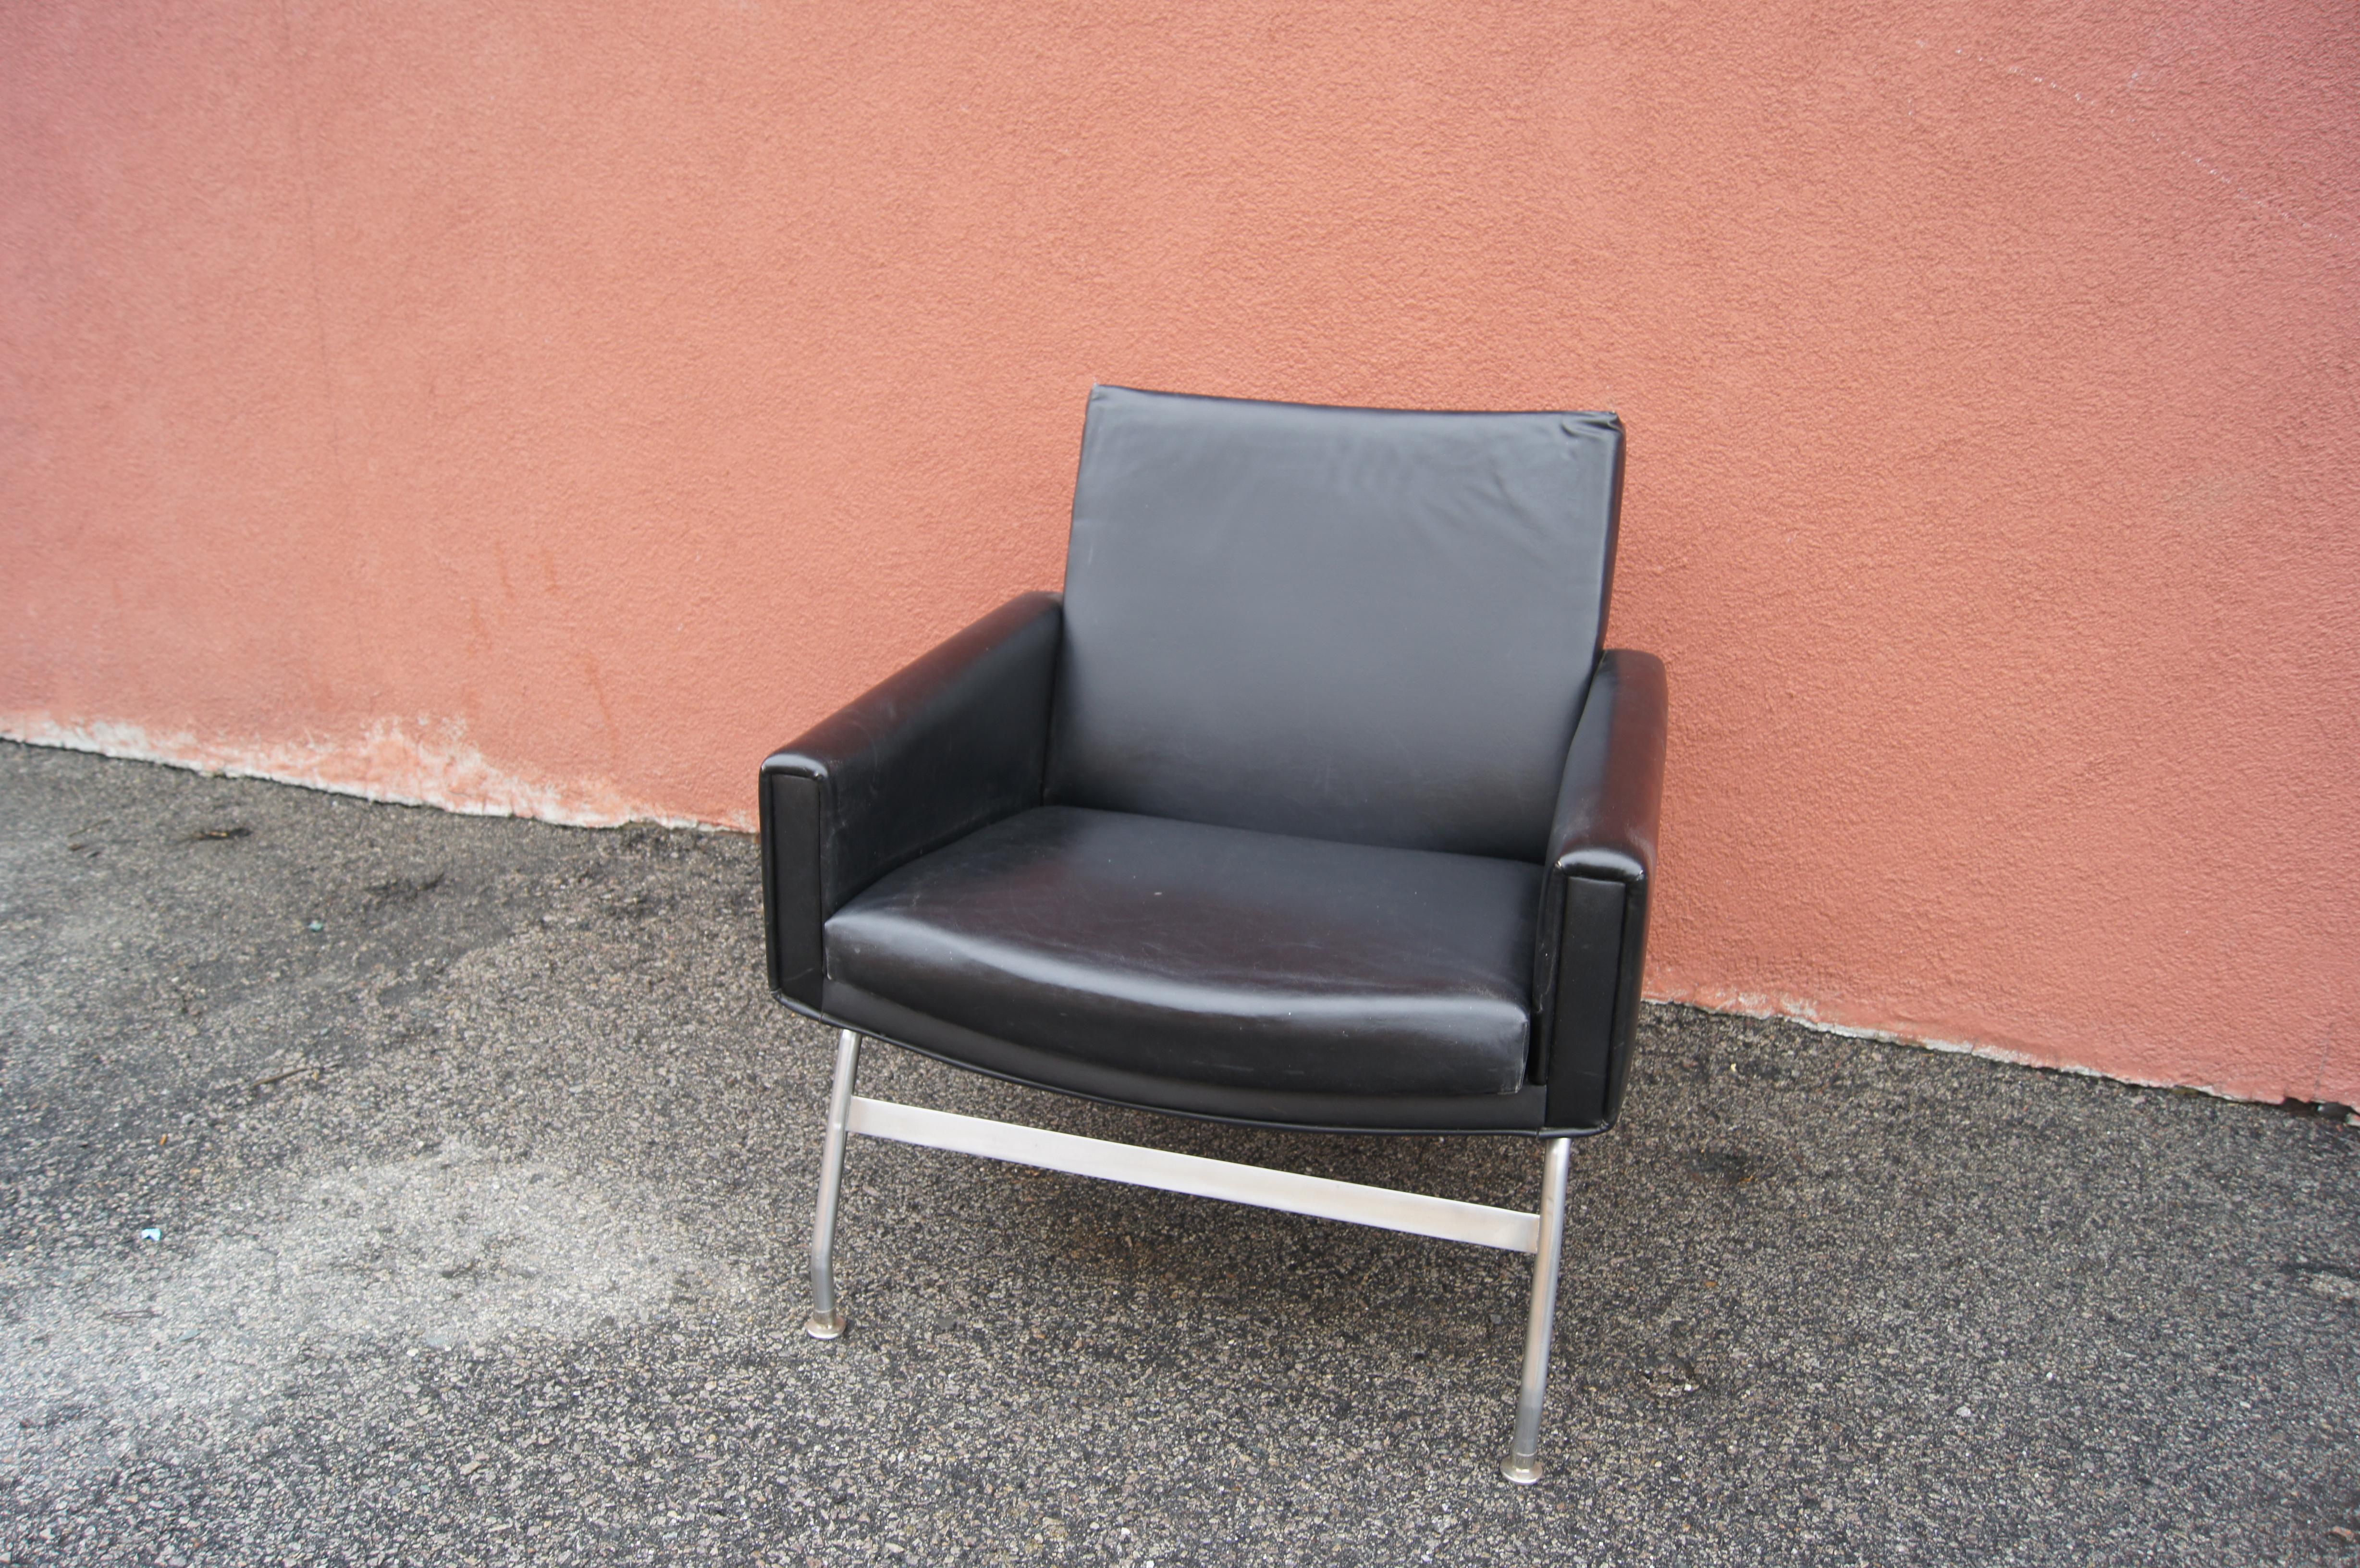 Manufactured in the late 1950s by Henry Rolschau Møbler in Vejen, this Danish modern leather armchair sits on a steel frame. Its upholstered seat, back, and arms are angled for comfort, creating a dynamic line.

Manufacturer's label underneath.